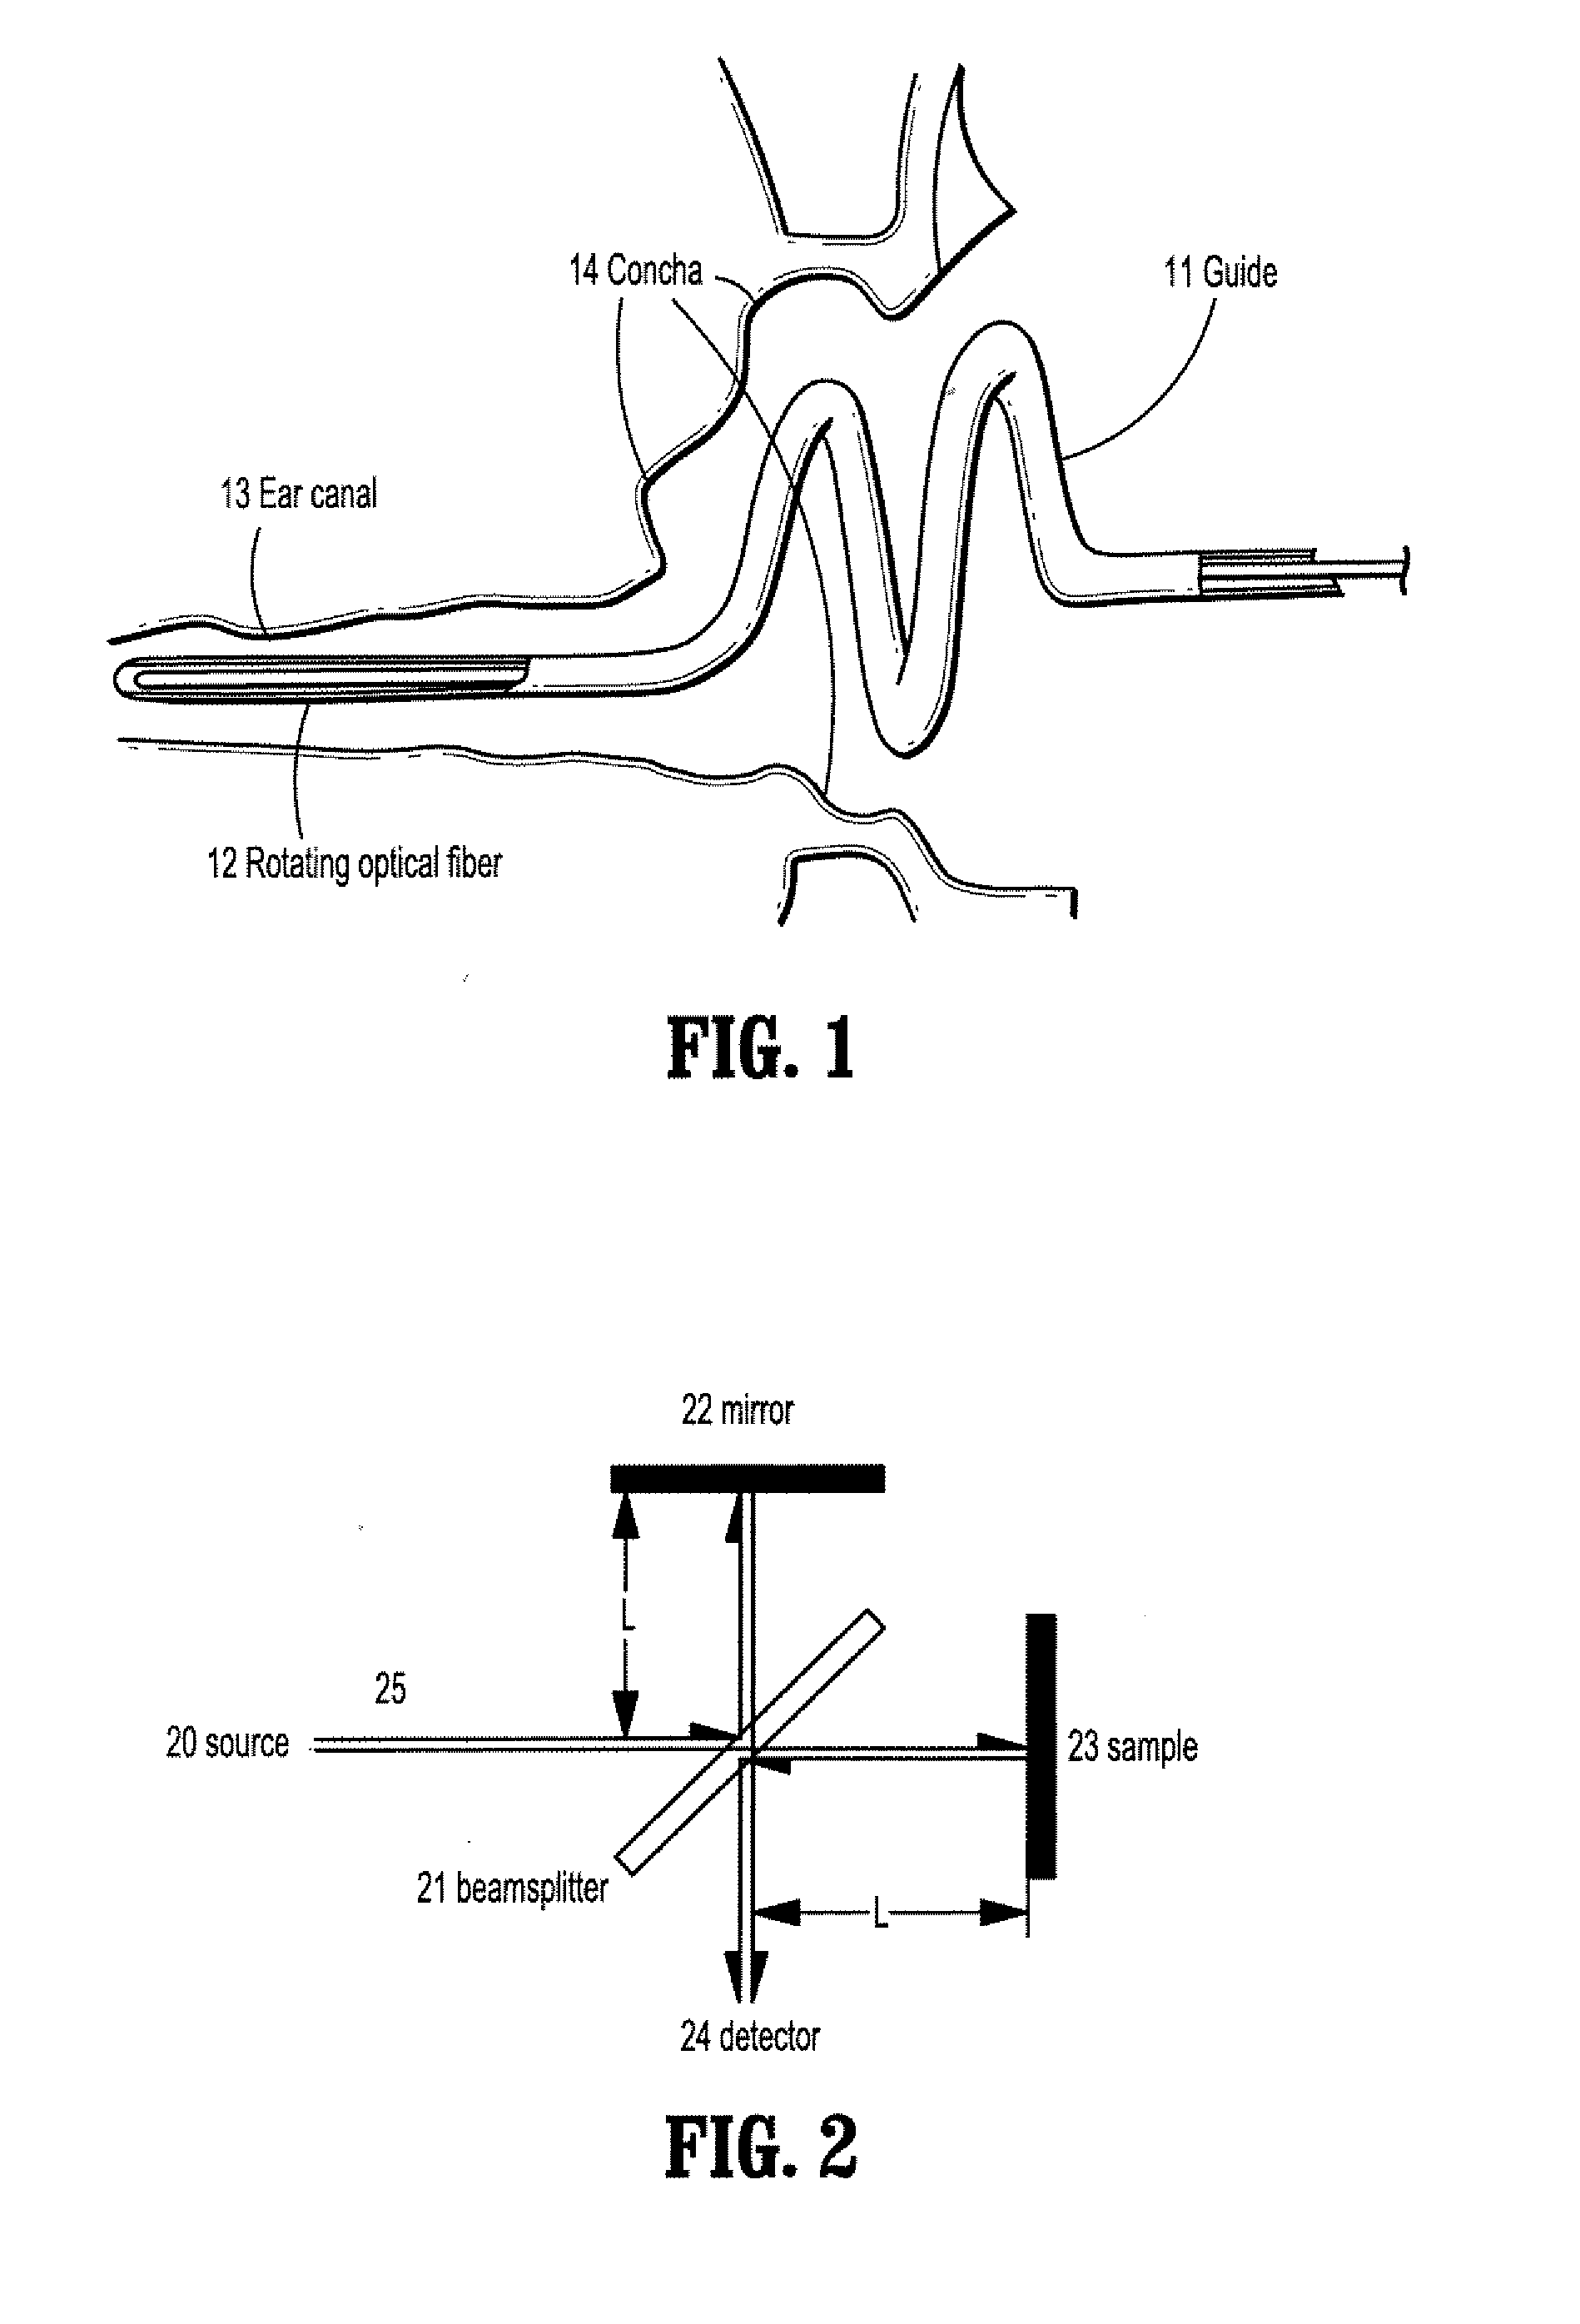 System and method for reconstruction of the human ear canal from optical coherence tomography scans